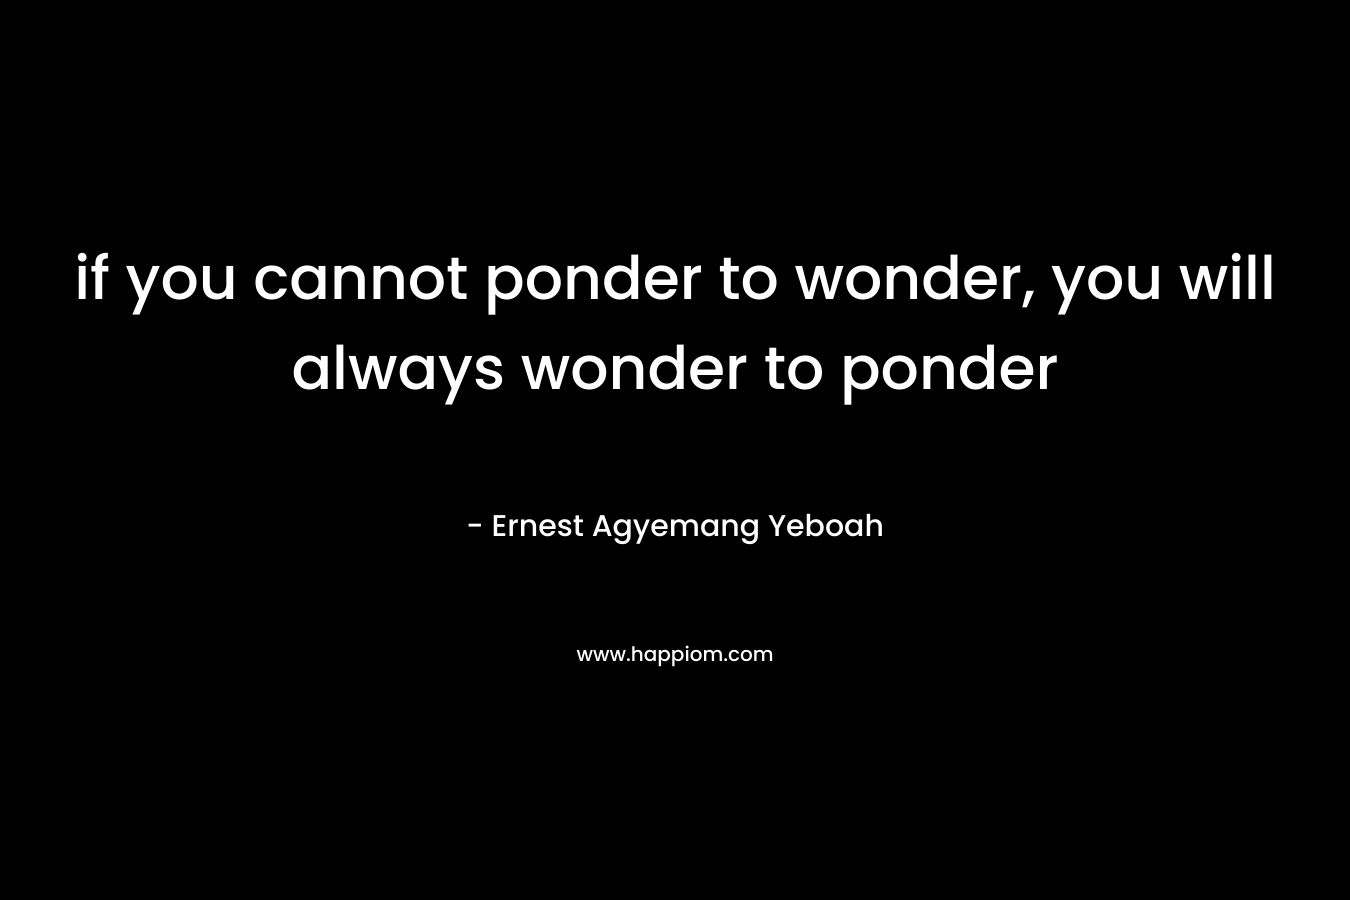 if you cannot ponder to wonder, you will always wonder to ponder